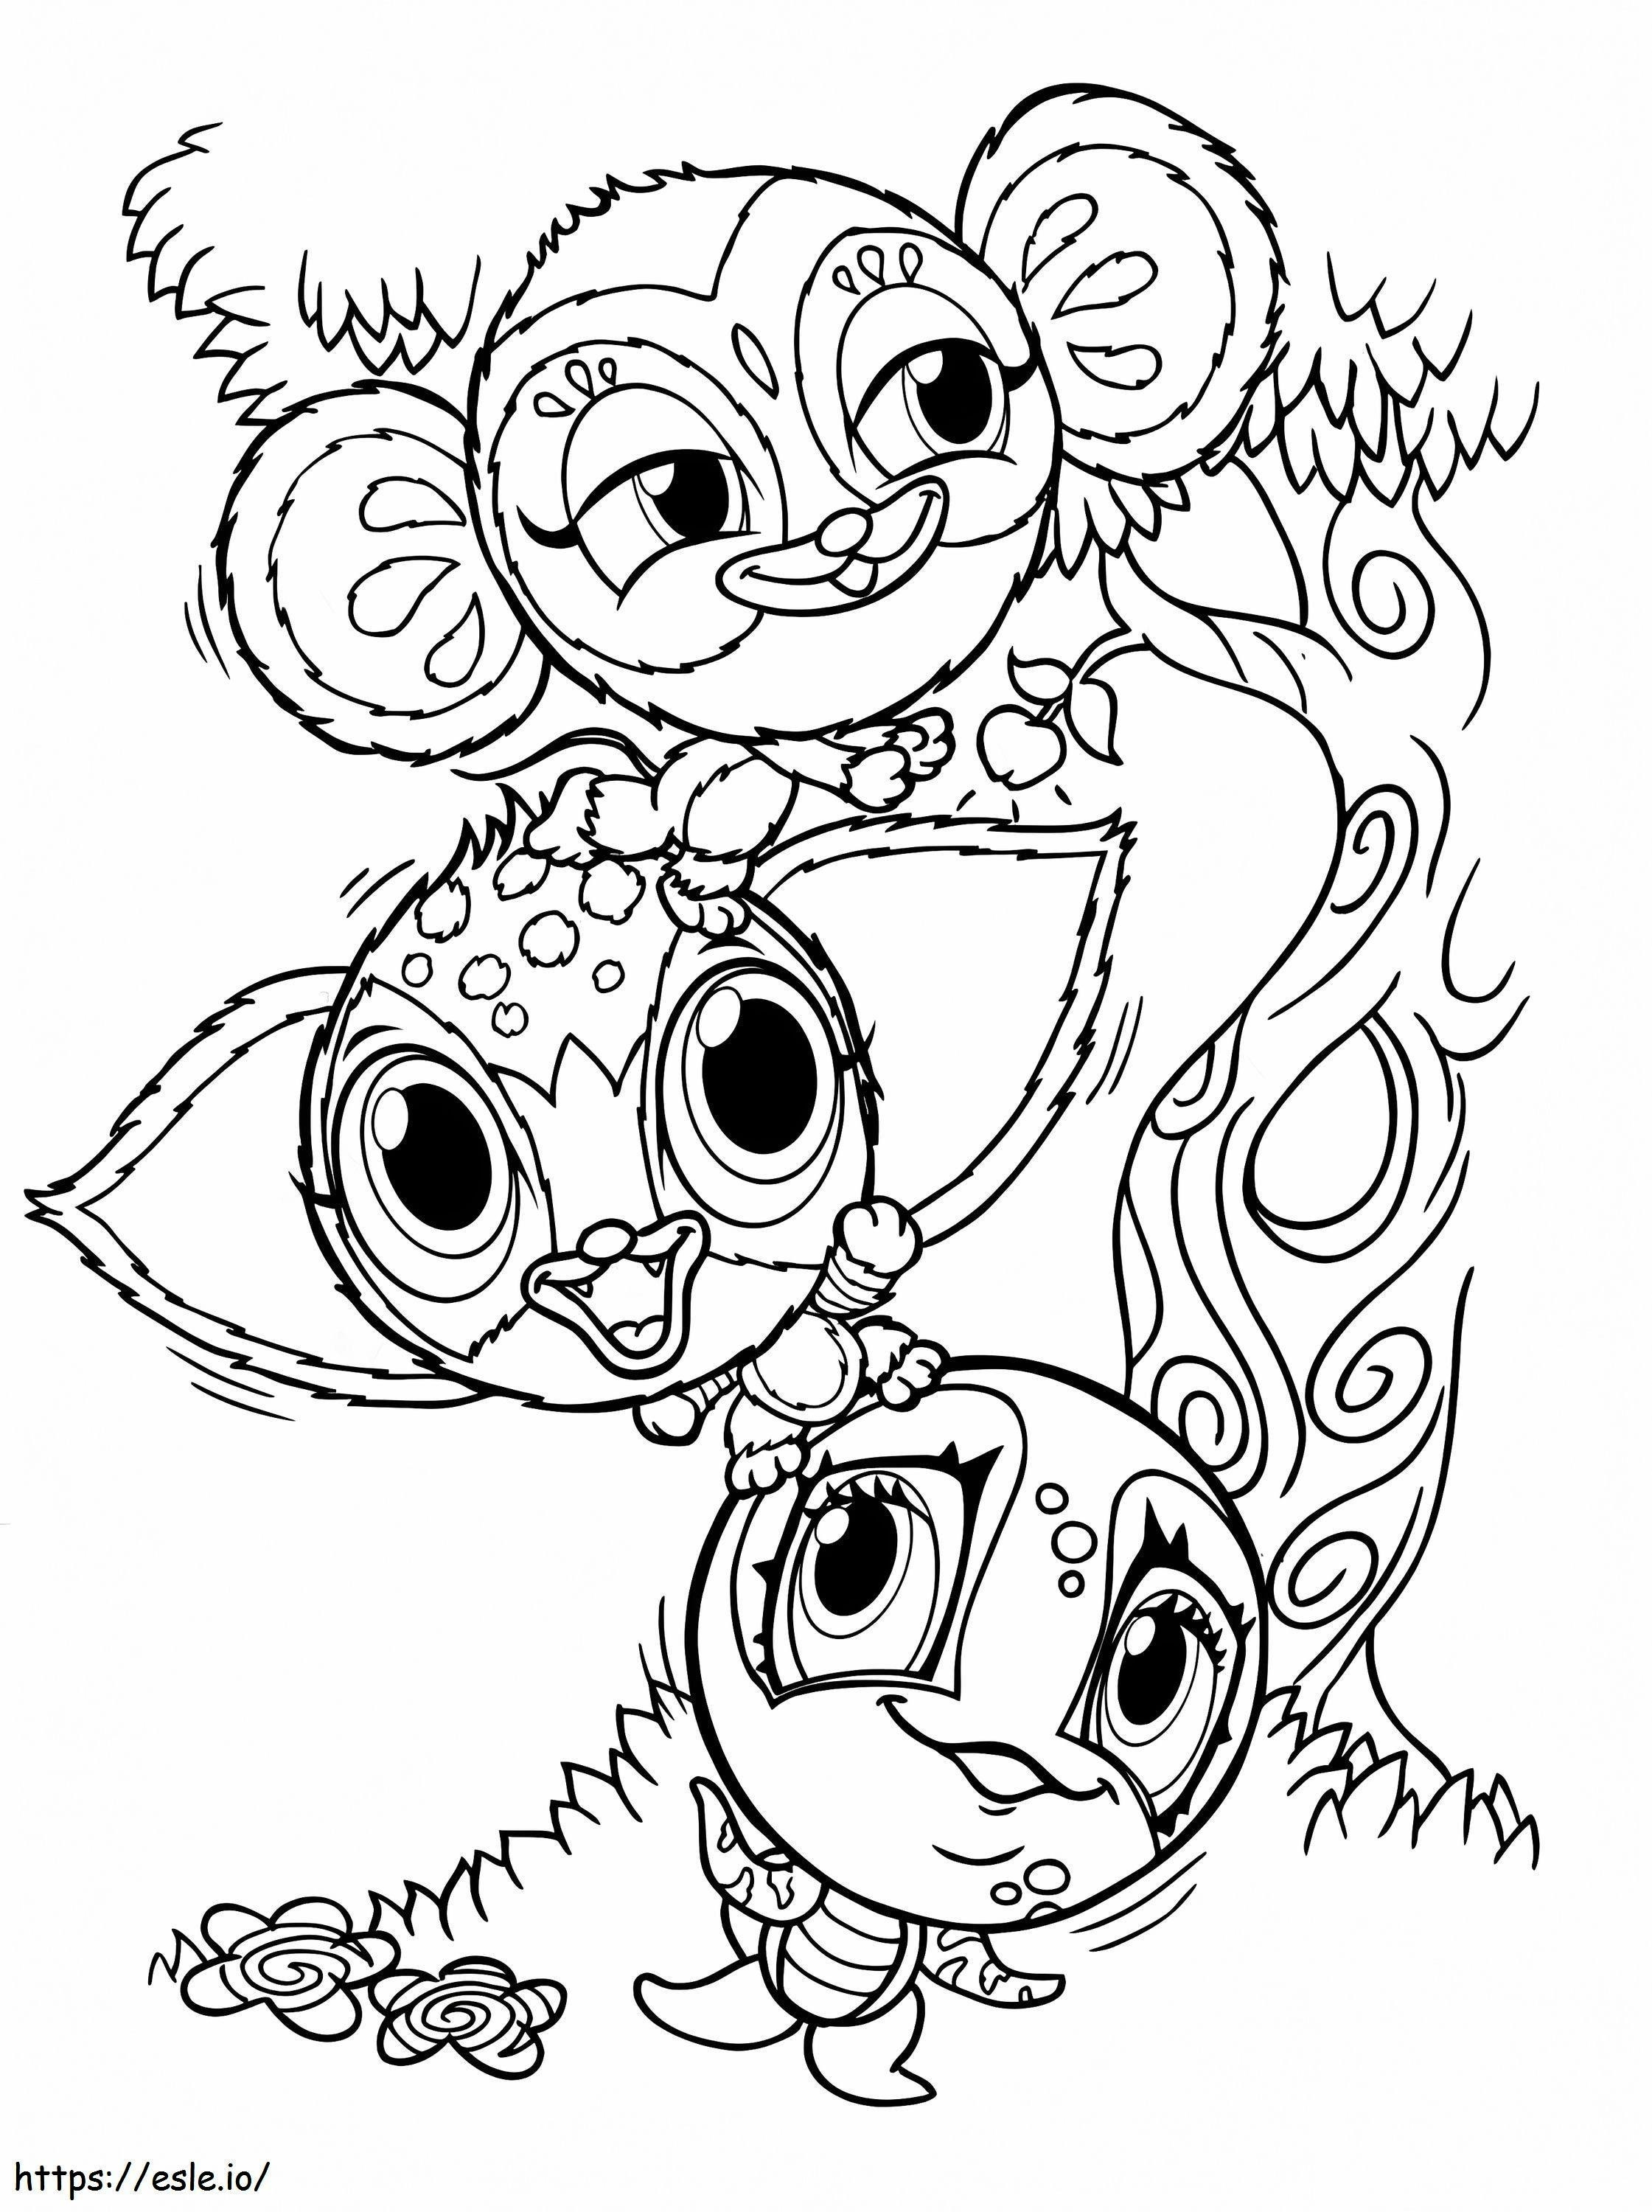 Funny Zoobles coloring page